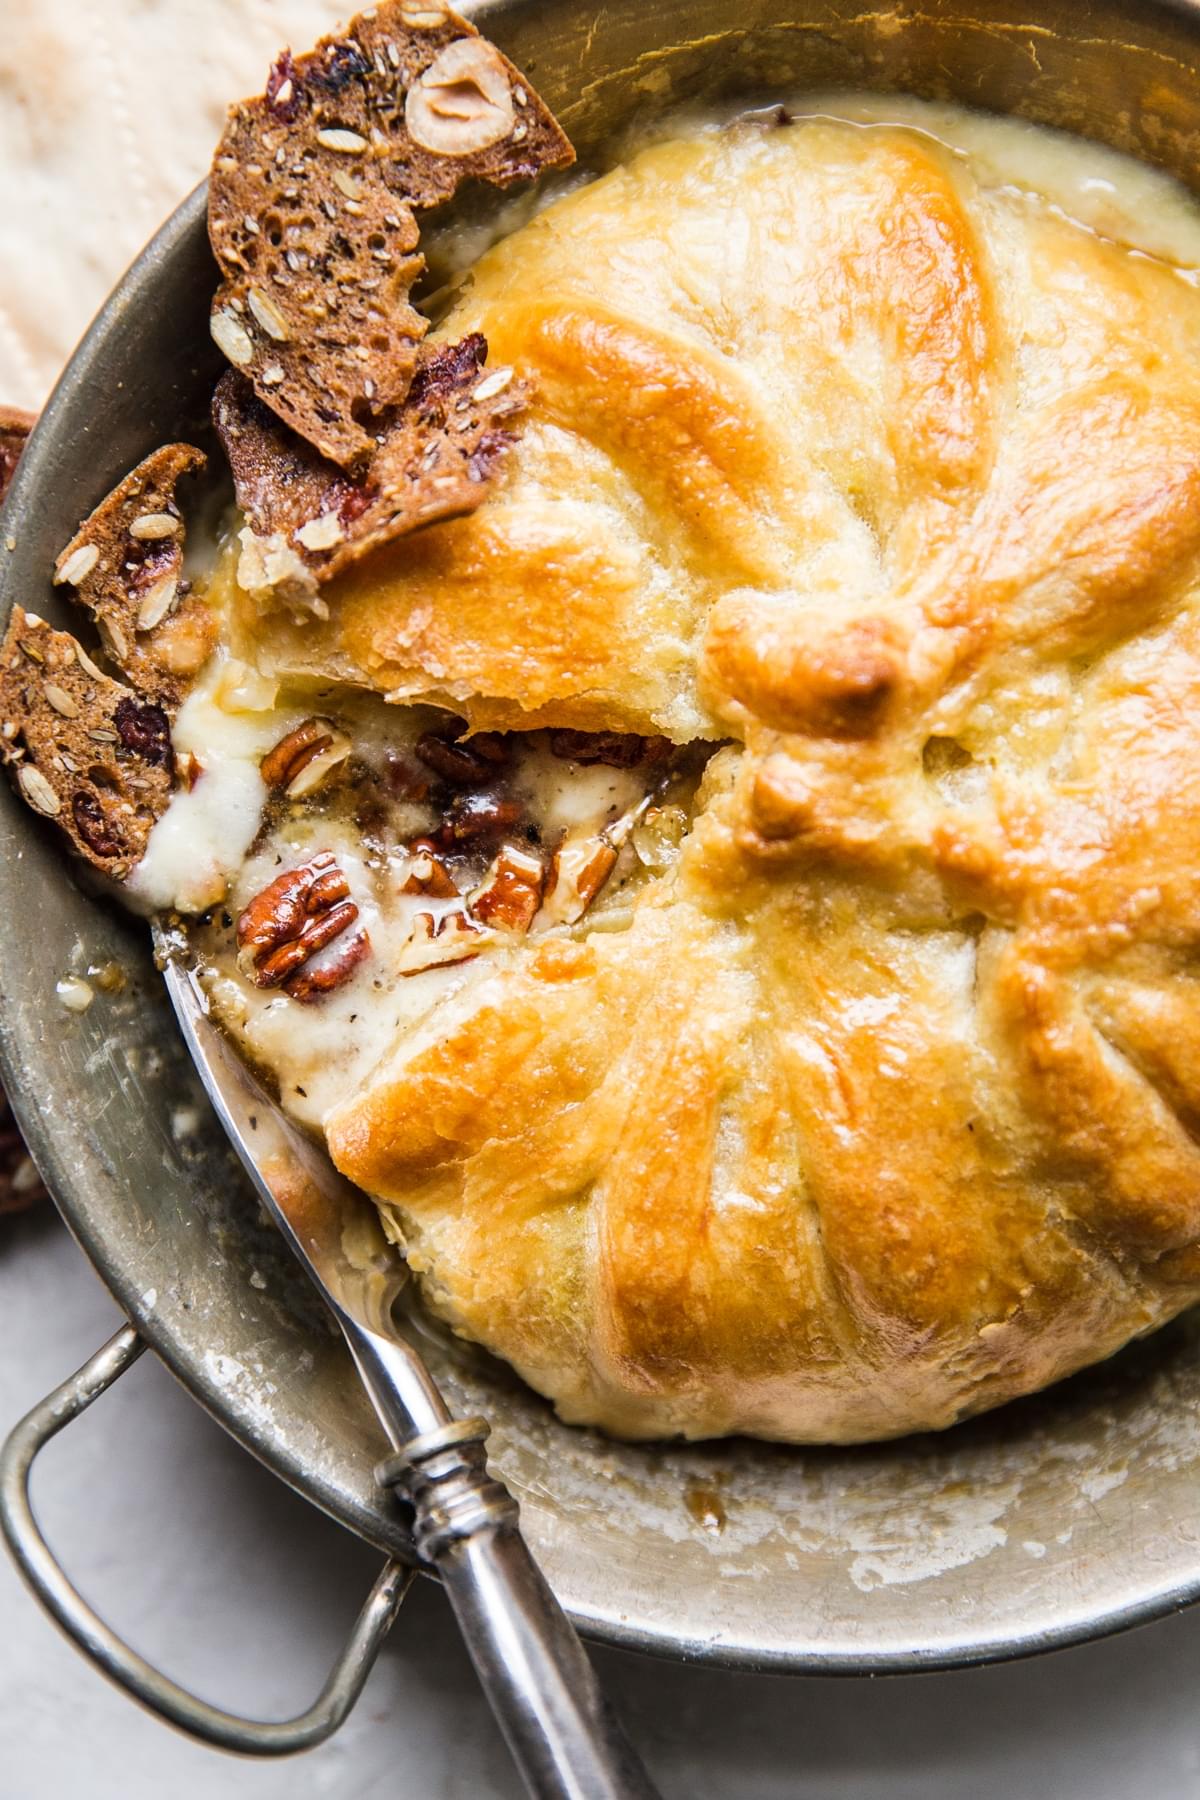 baked brie made with pecans, brown sugar and pepper wrapped in puffed pastry dough in baking dish being served with crackers